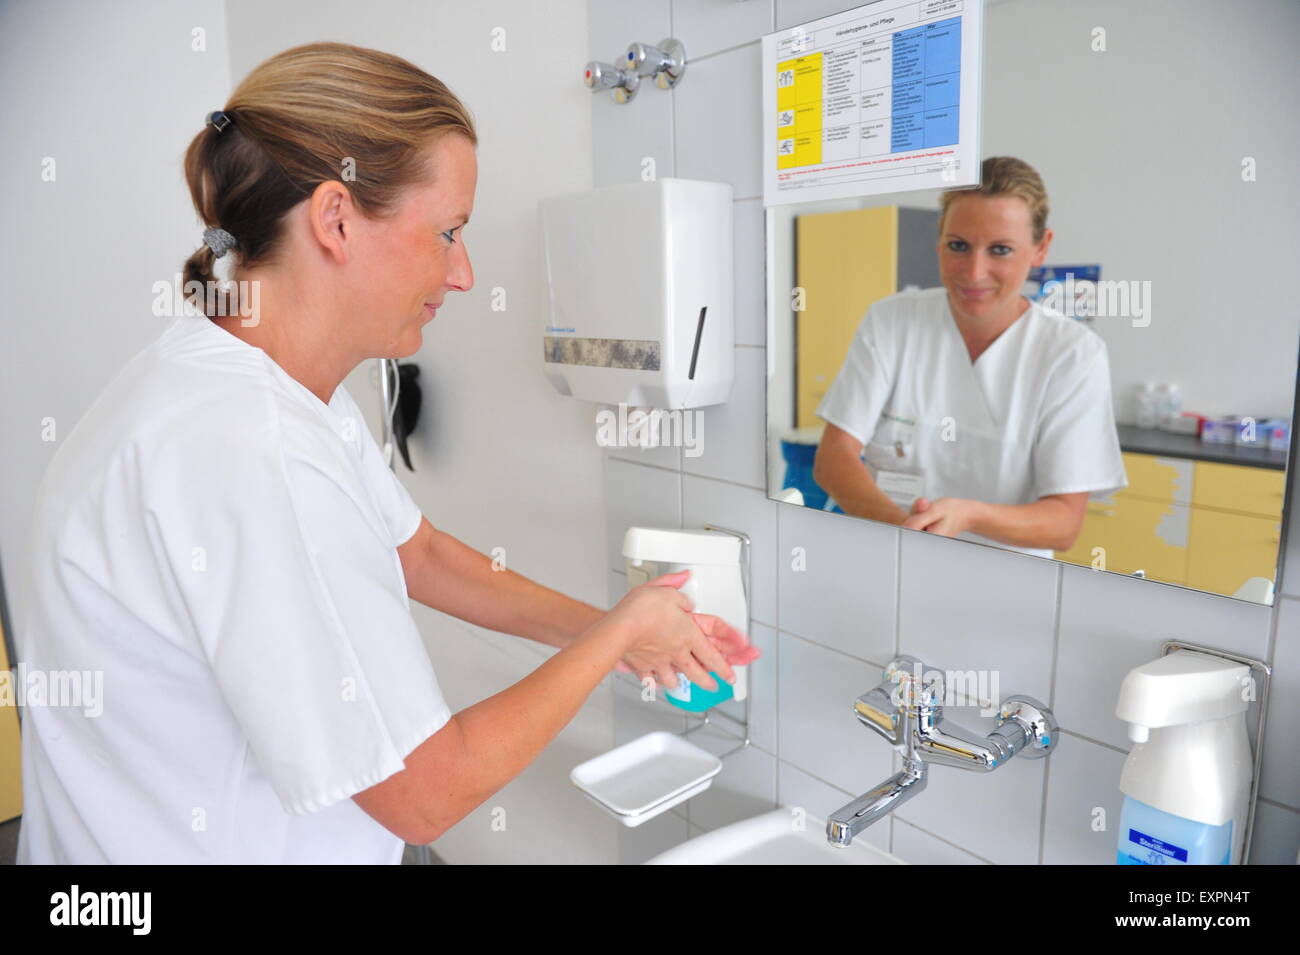 Frankfurt, Germany - September 17, 2009 - Doctor washing hands in hospital to avoid infections Stock Photo